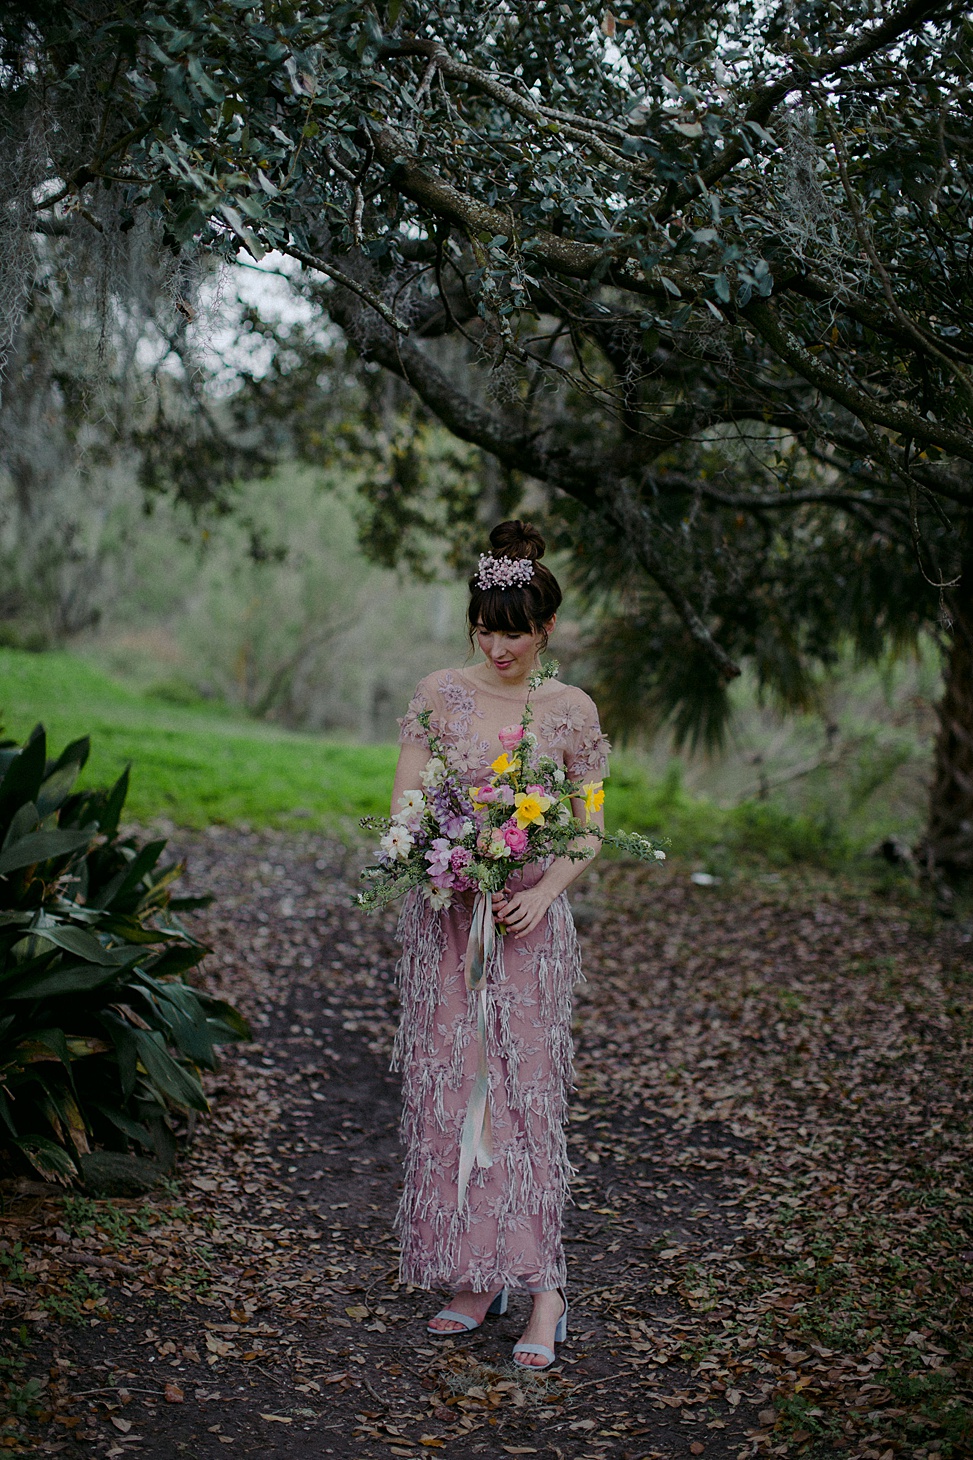 The bride was wearign a mauve beaded and applique sheath wedding dress and blue shoes